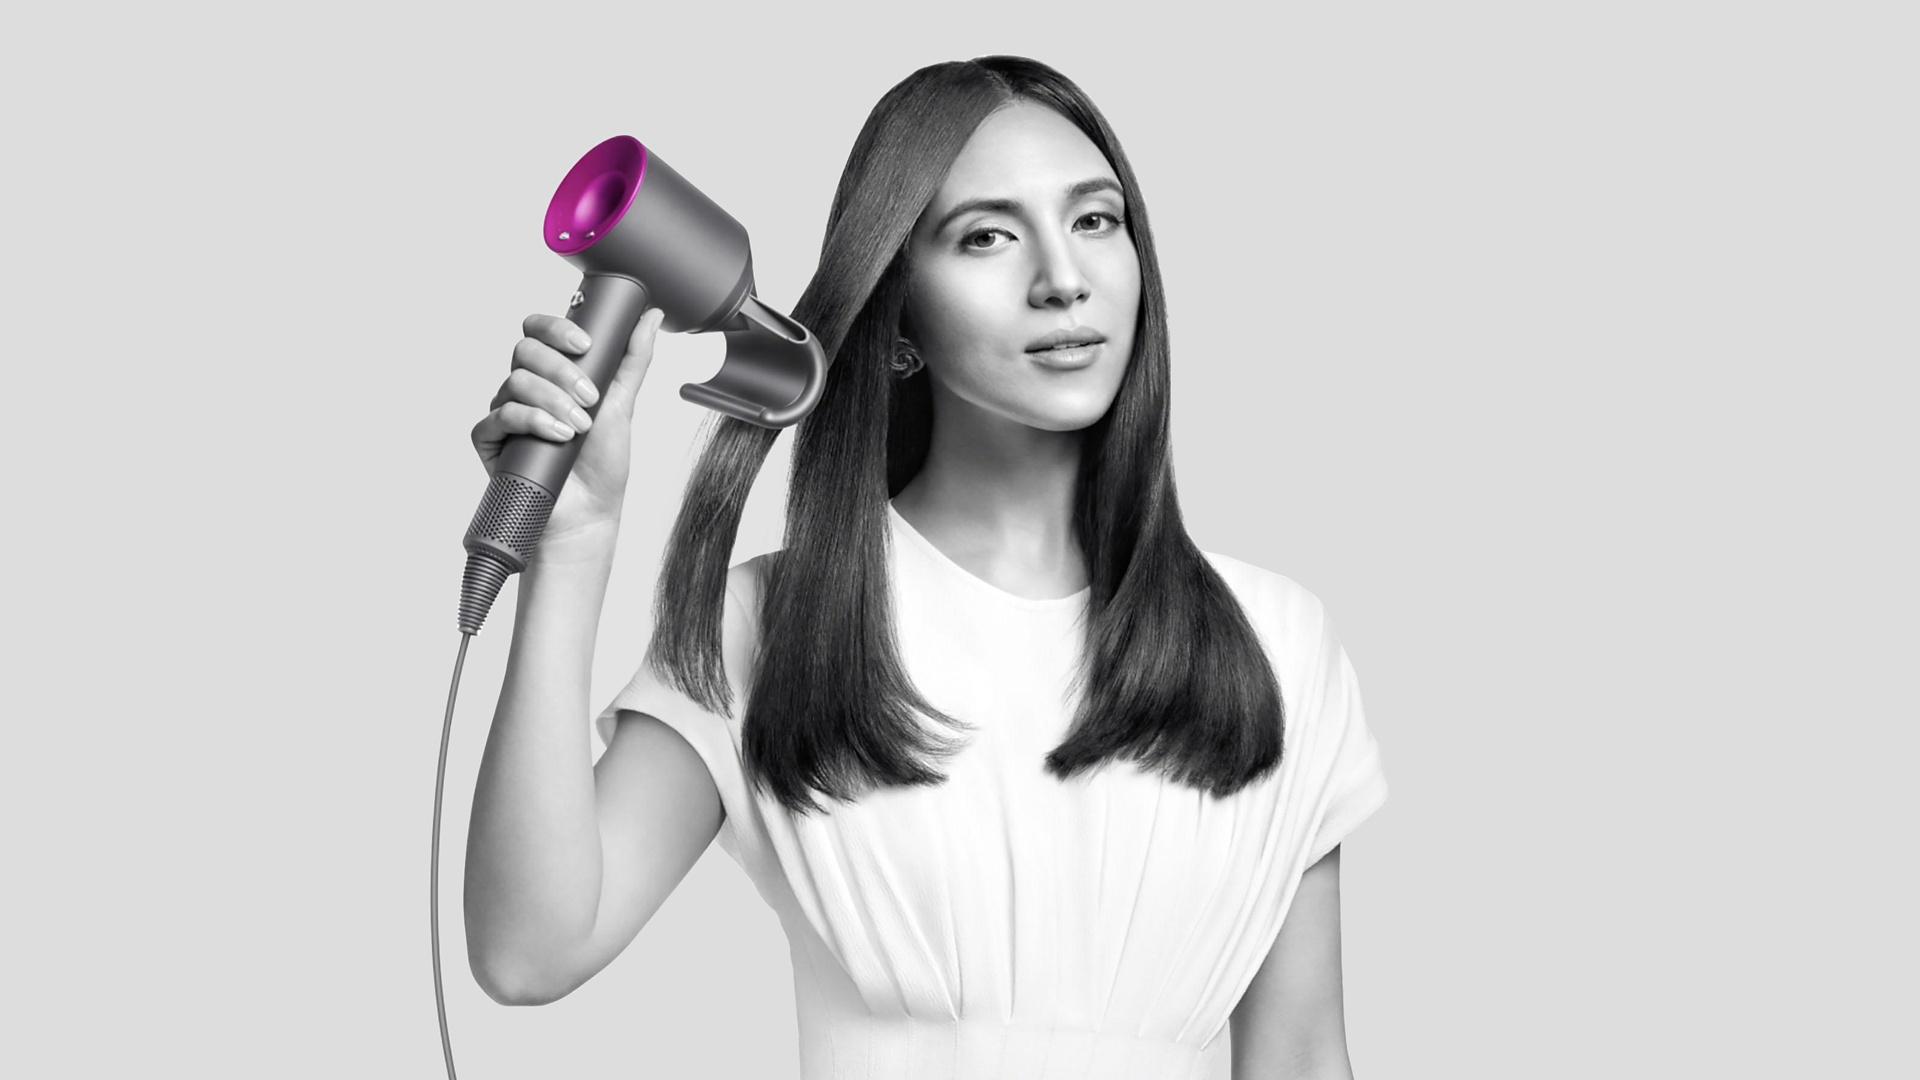 A model using the Dyson Supersonic hair dryerA model using the Dyson Supersonic hair dryer